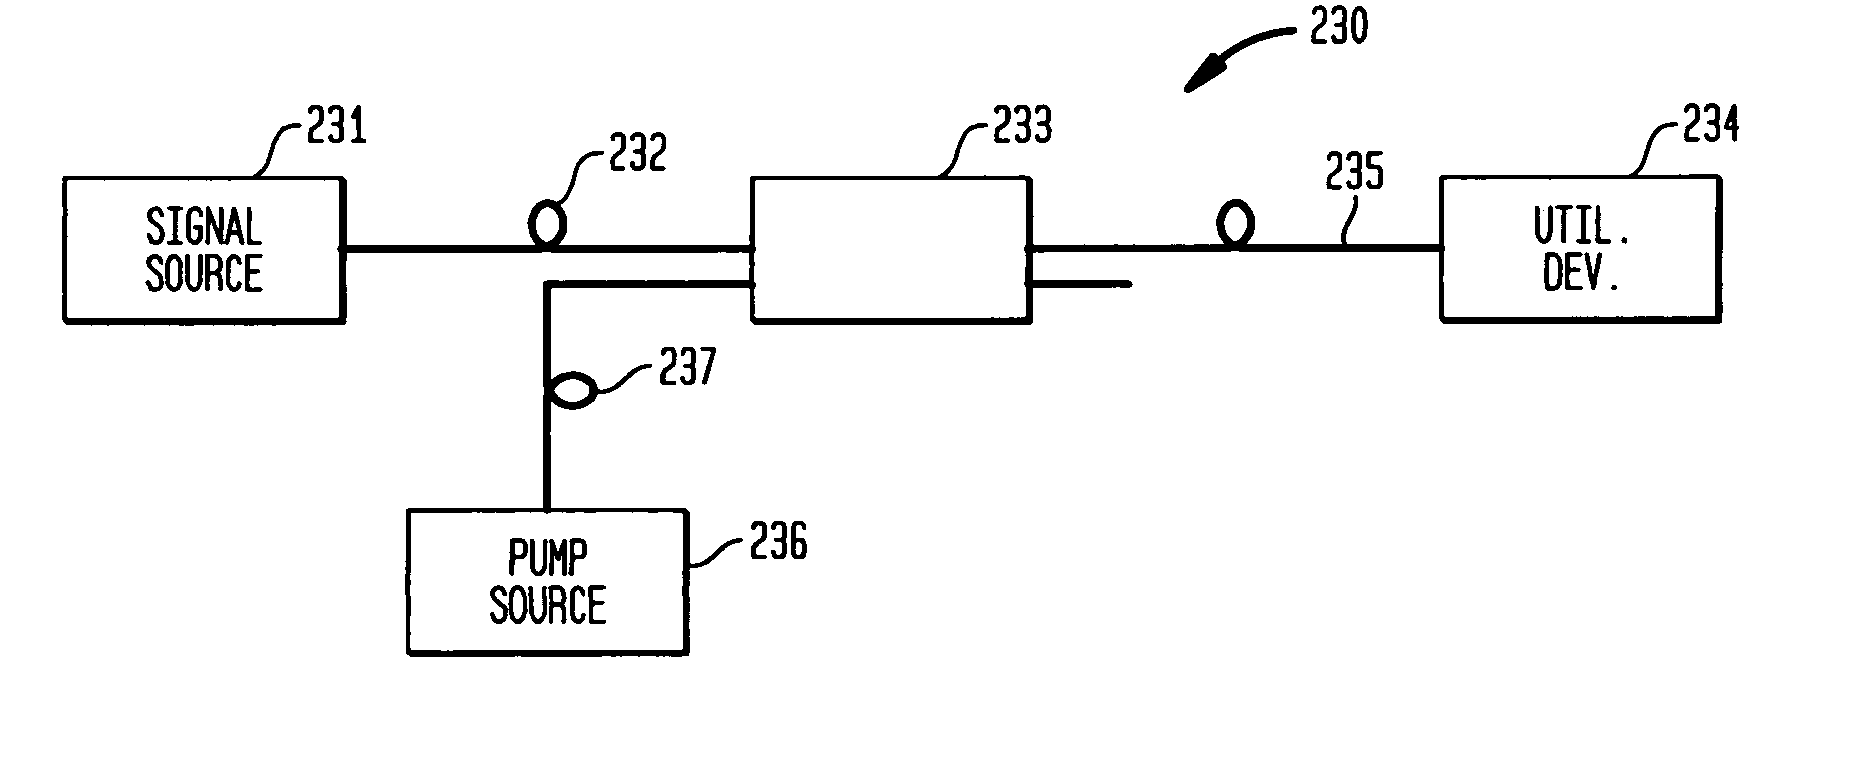 Large-mode-area optical fibers with reduced bend distortion